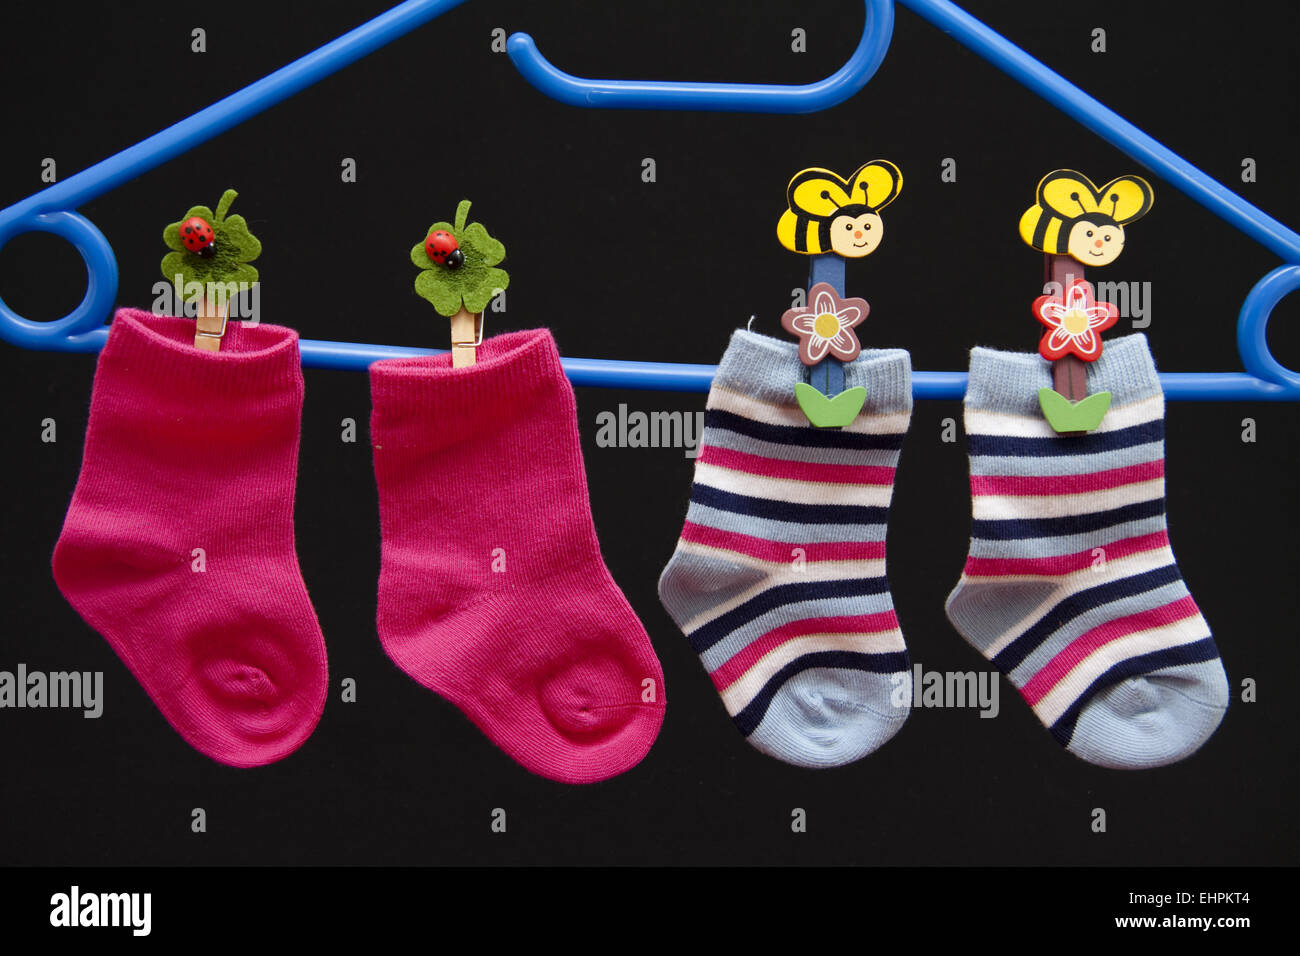 Child socks with clips Stock Photo